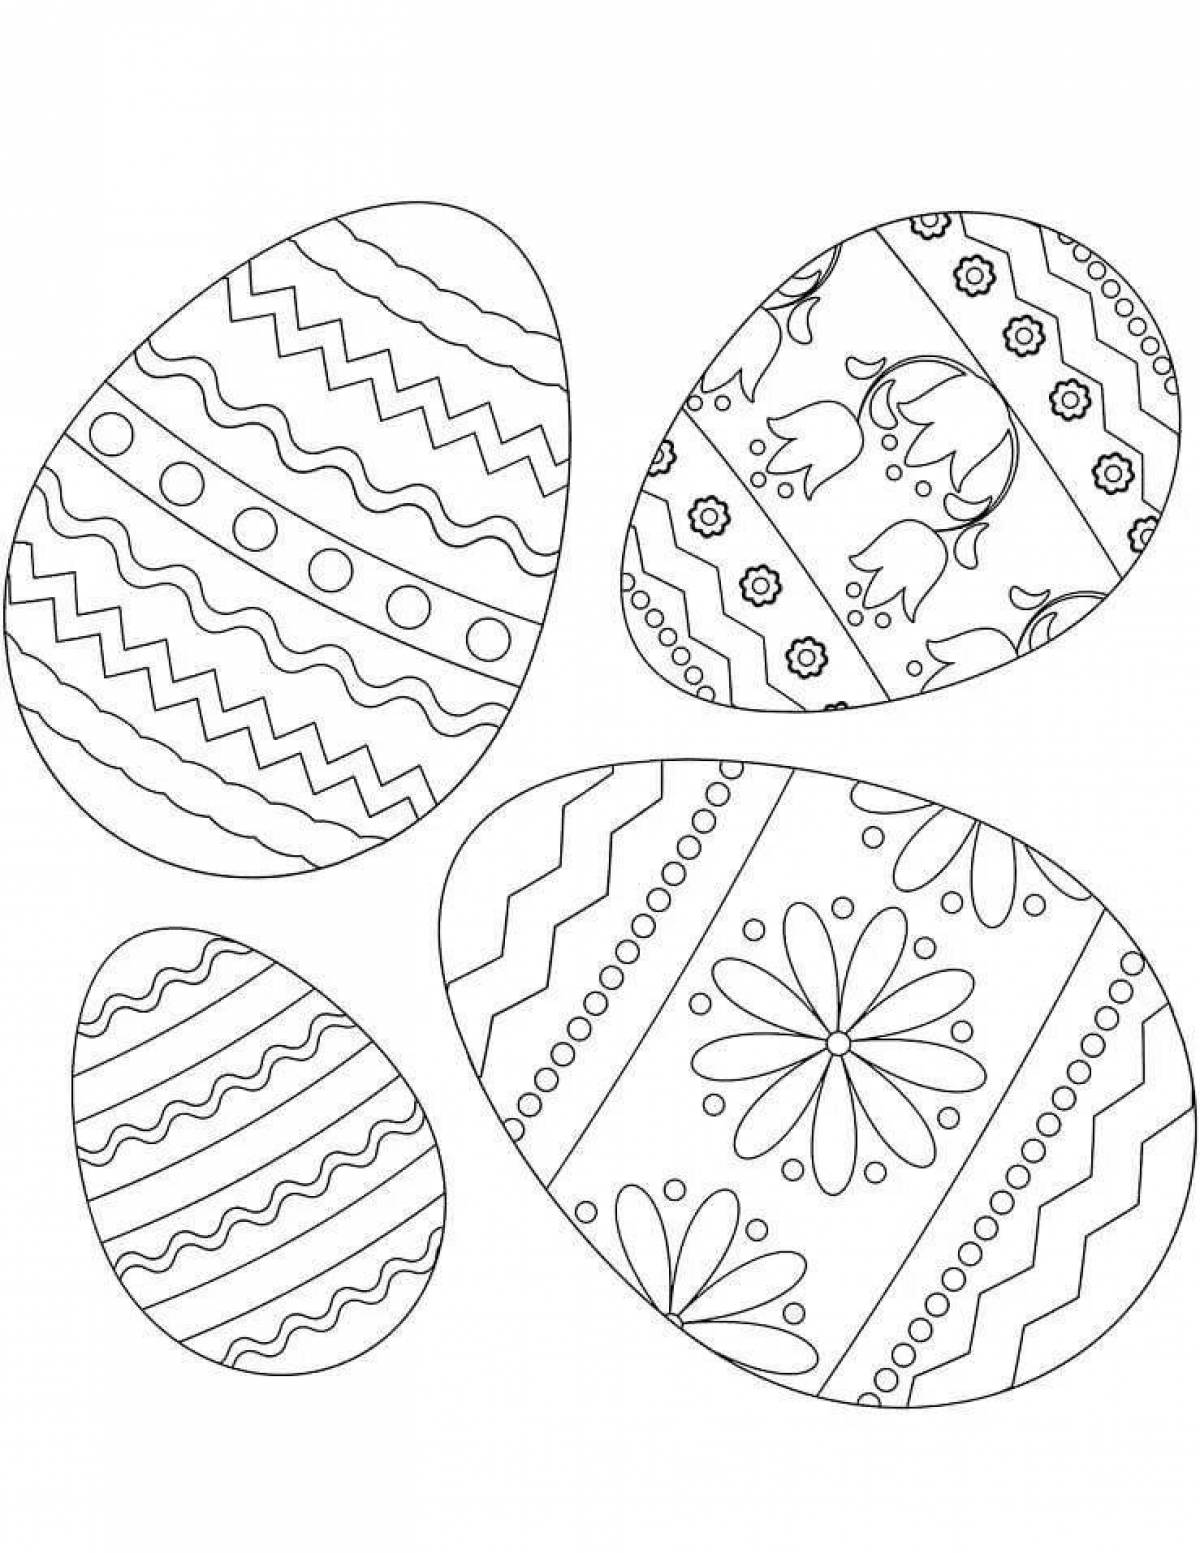 Sweet Easter egg coloring page